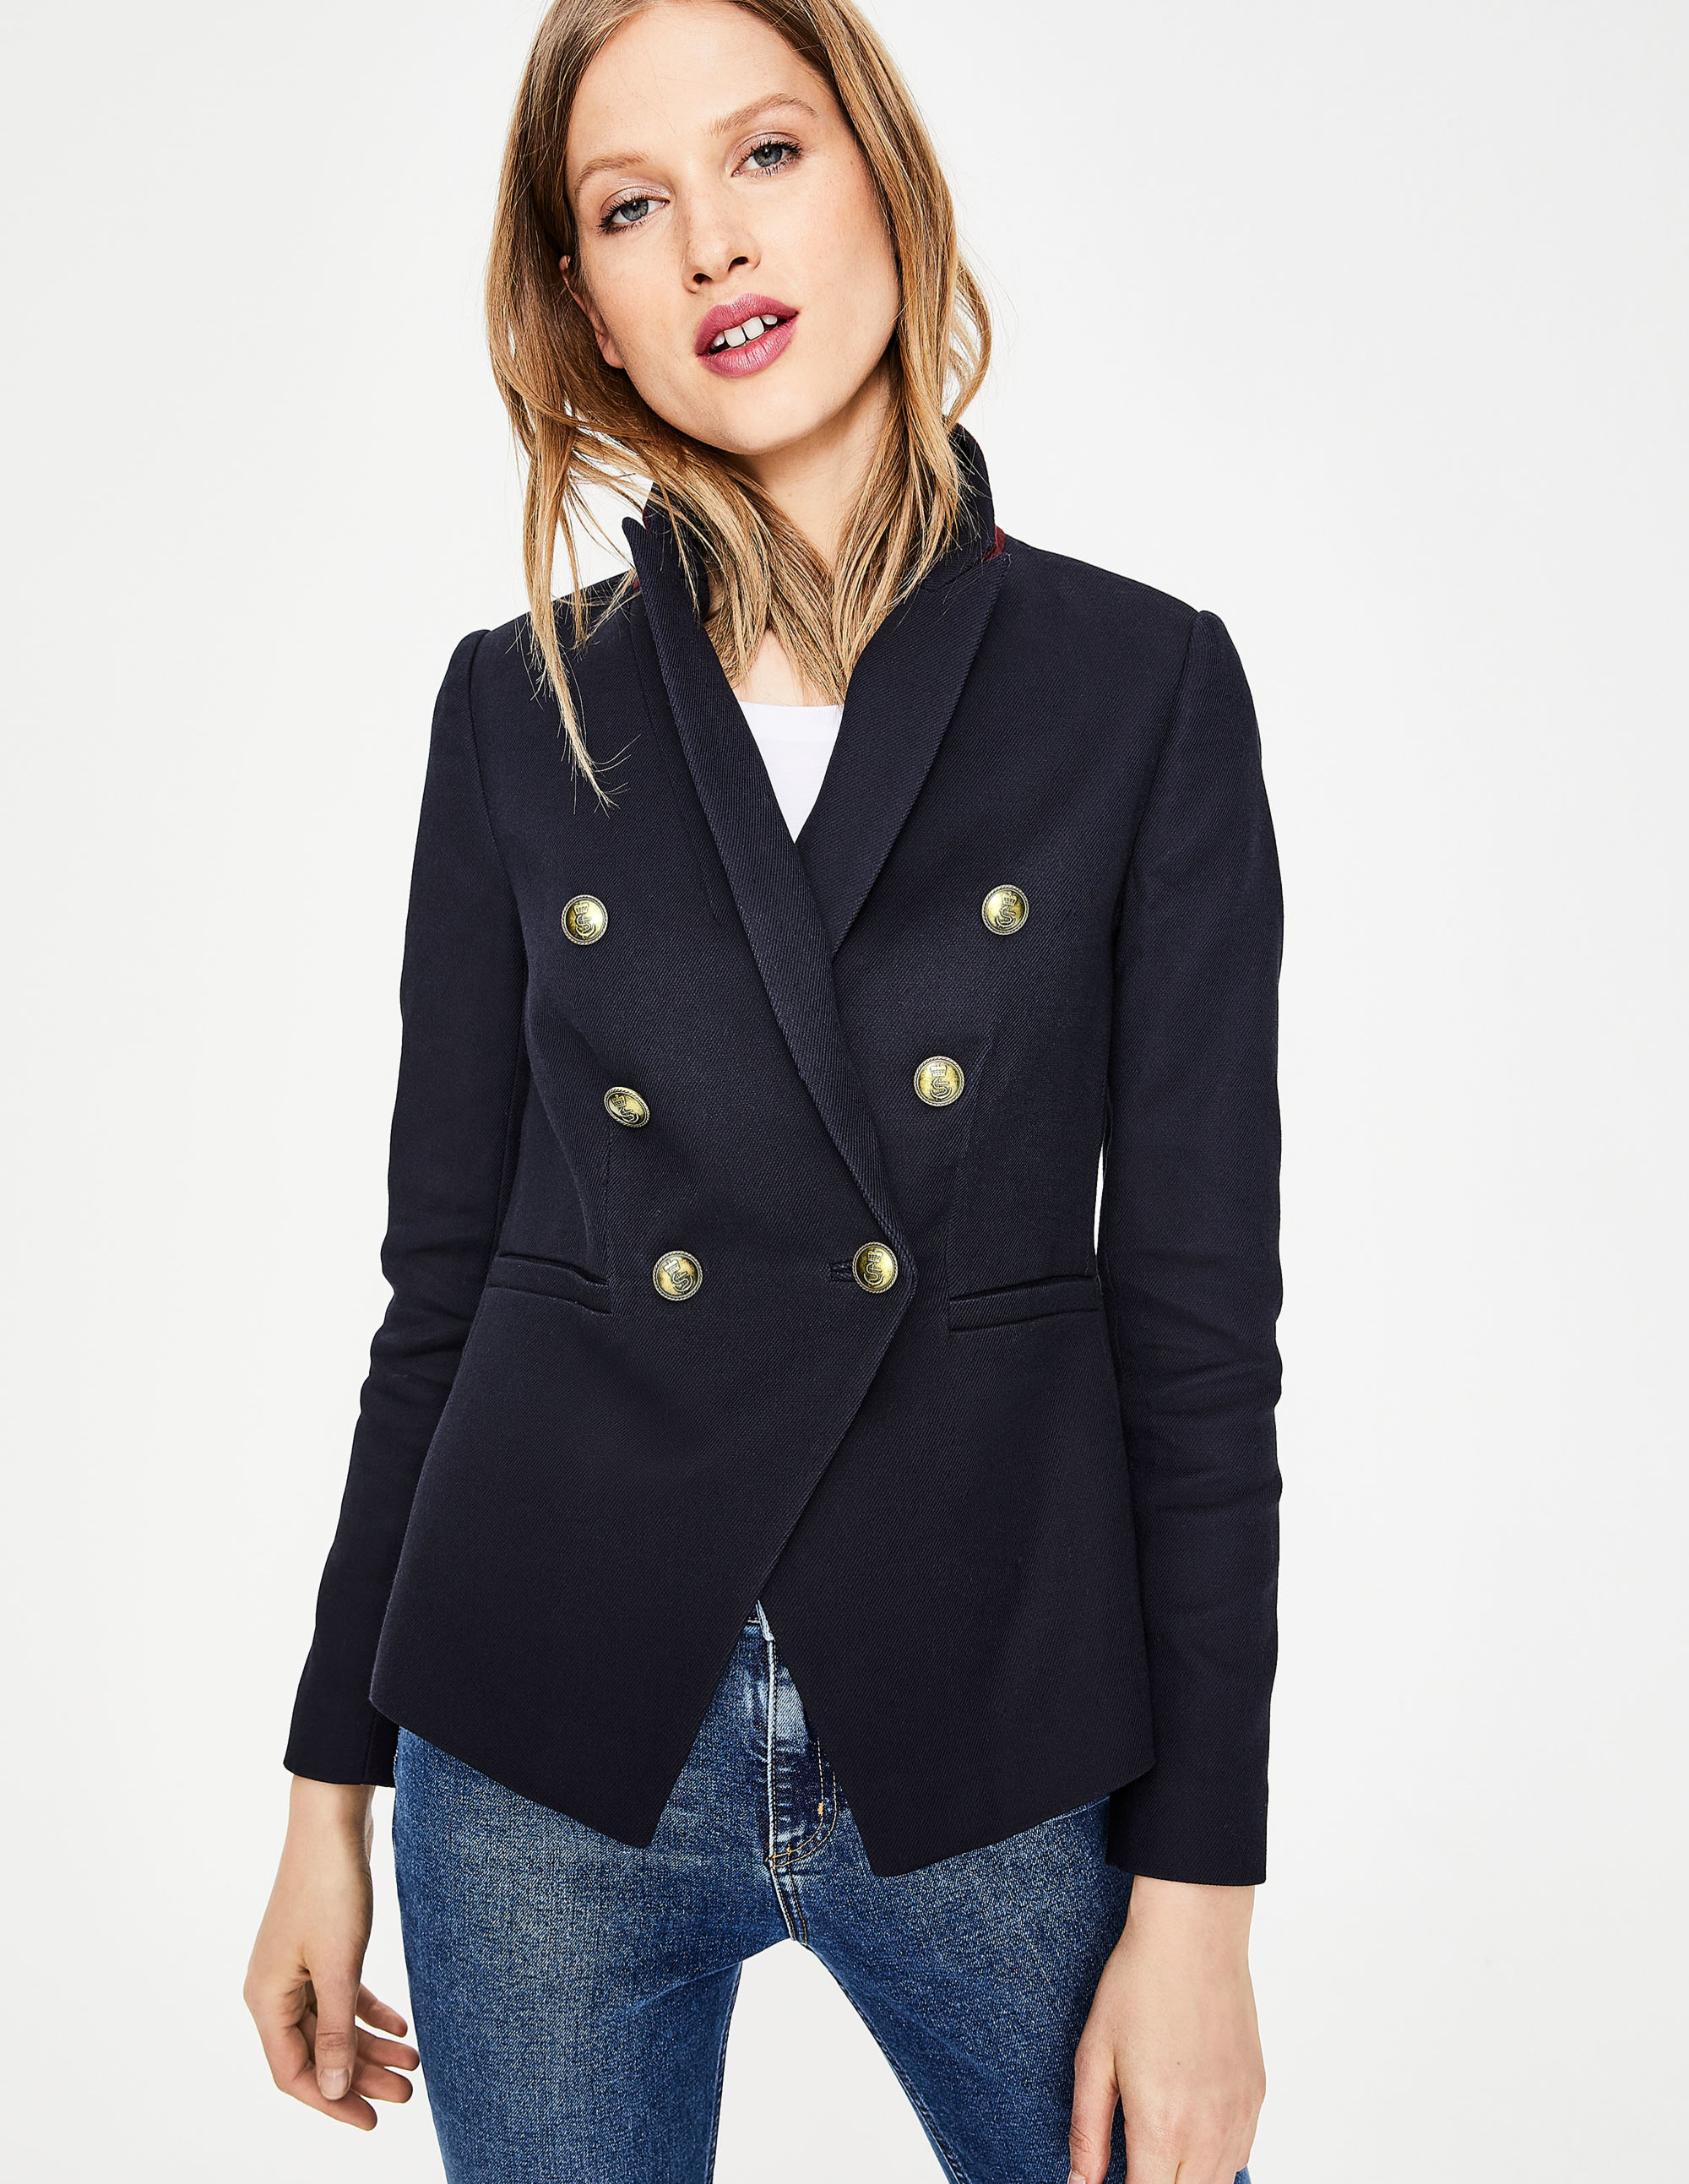 Navy Blue Blazer with Gold Buttons